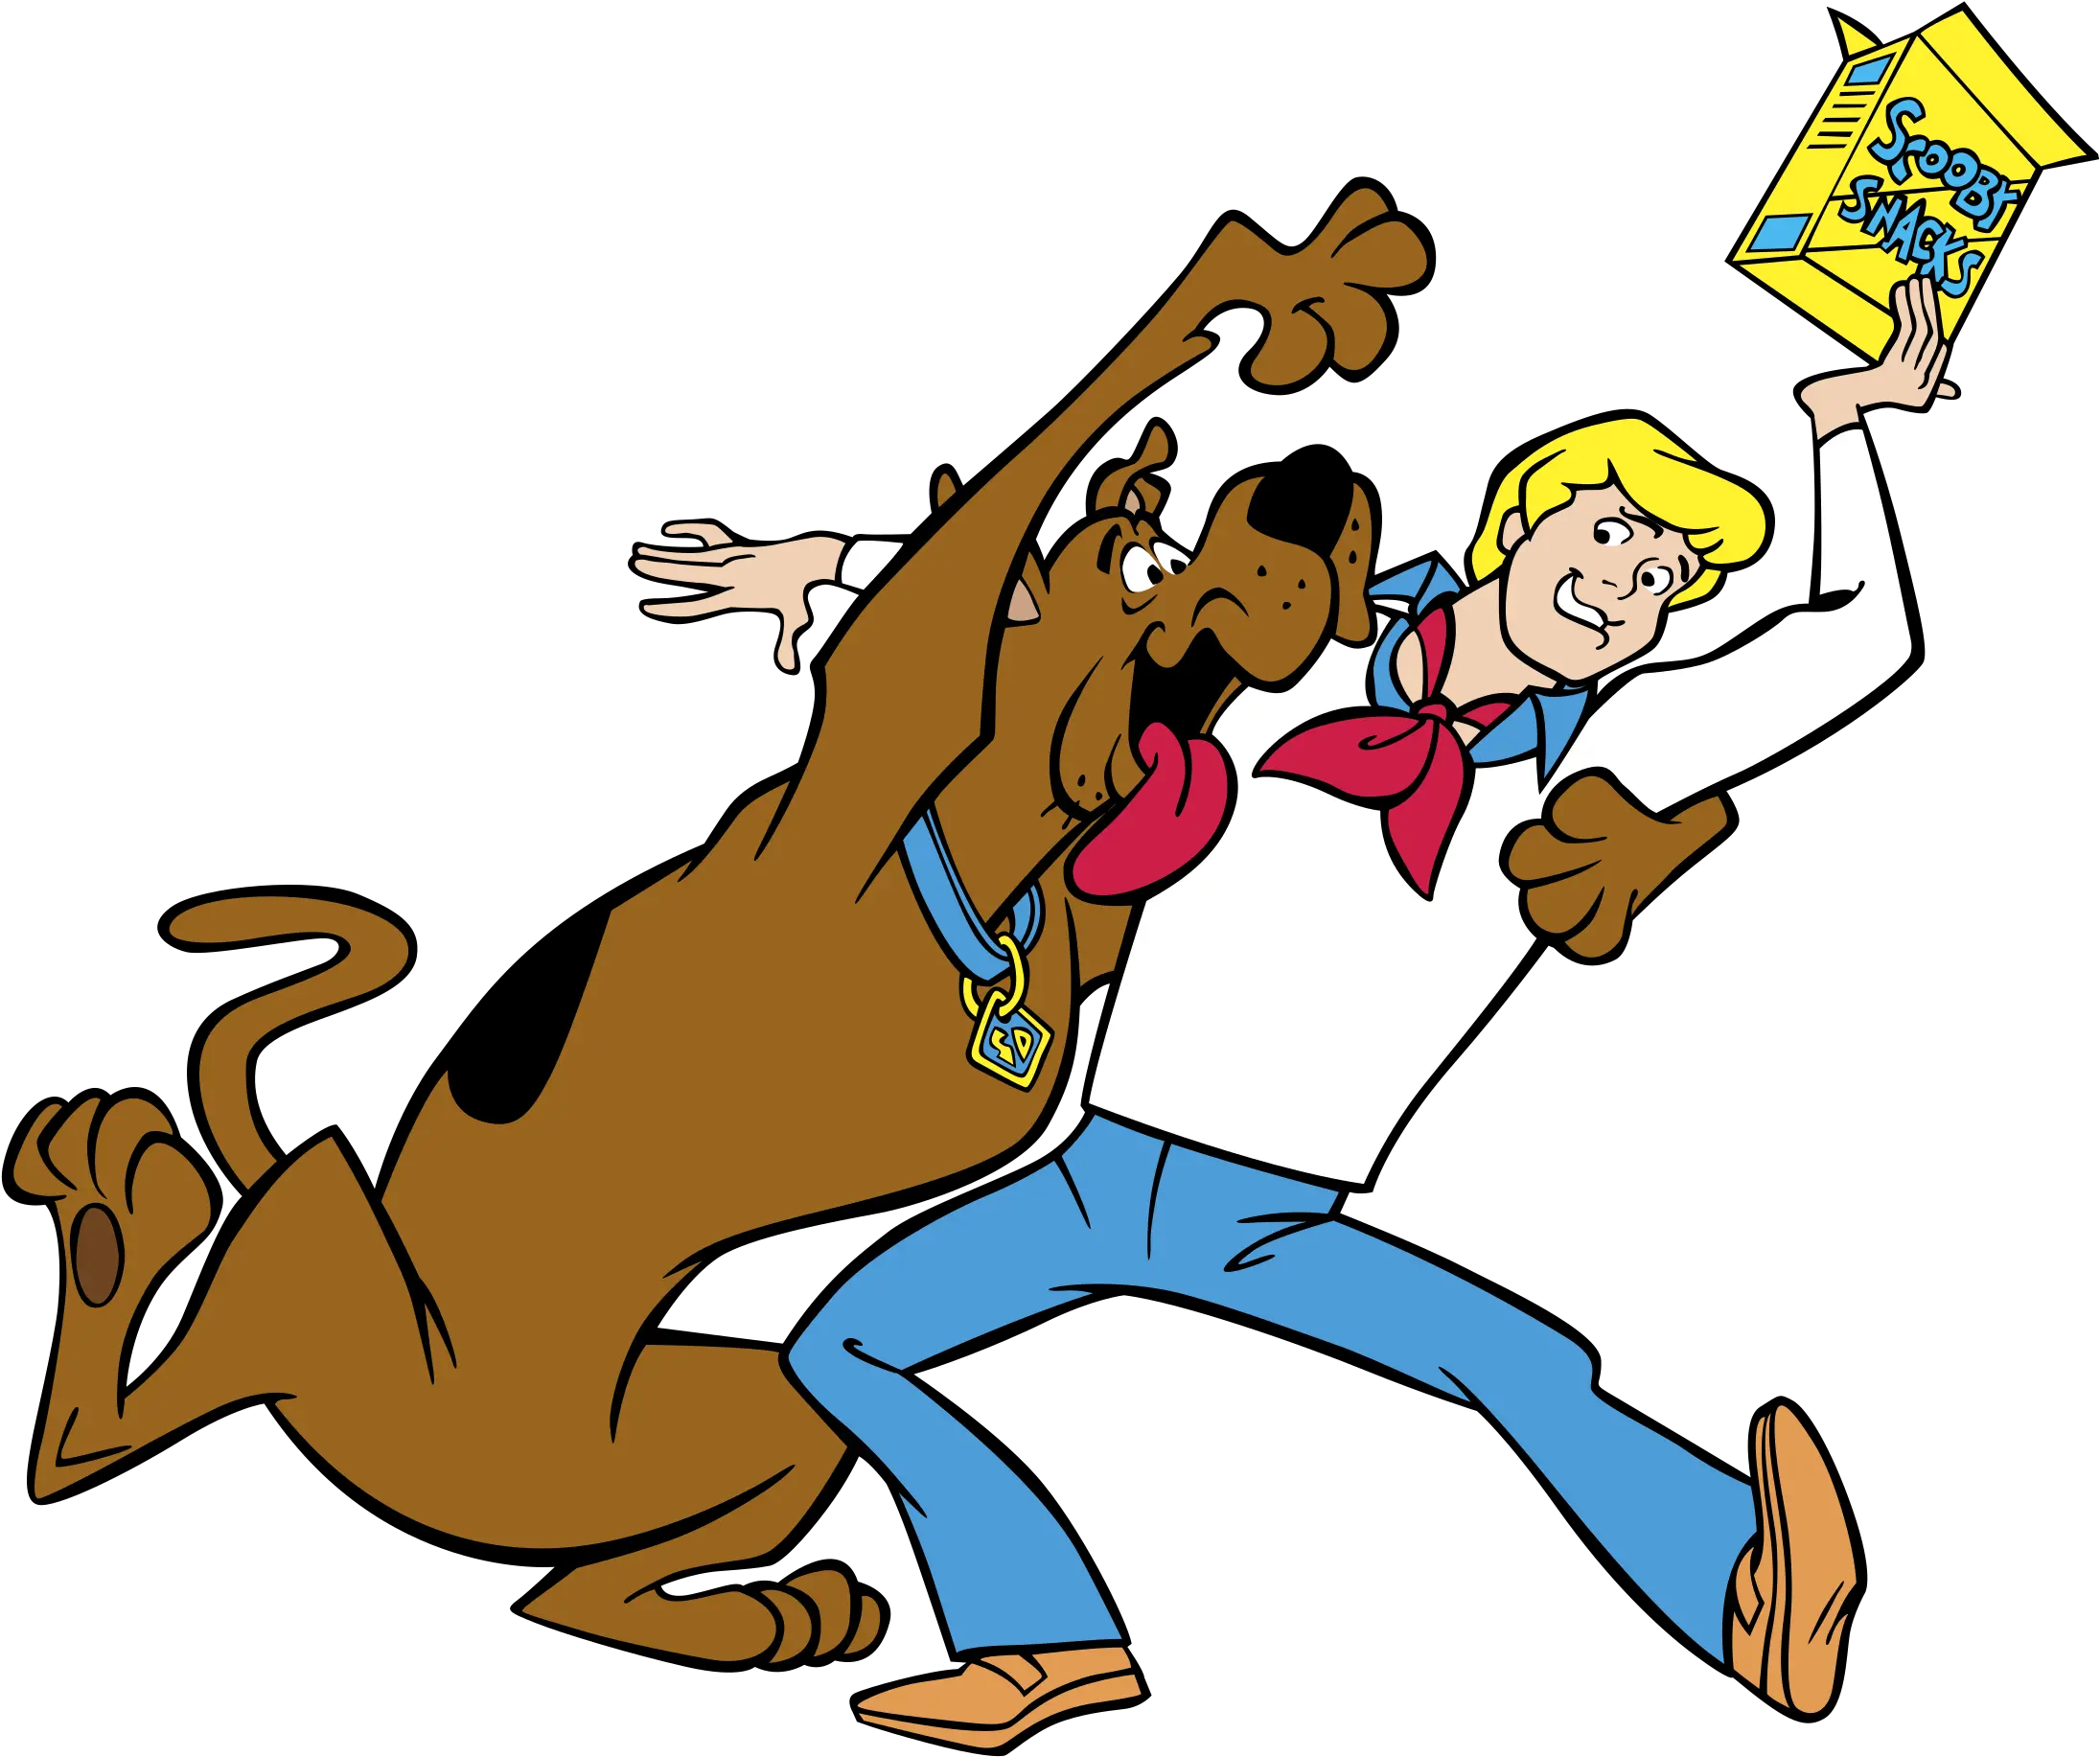 Scooby Doo Logo Png Transparent Svg Scooby Doo Scooby Snacks Scooby Doo Png